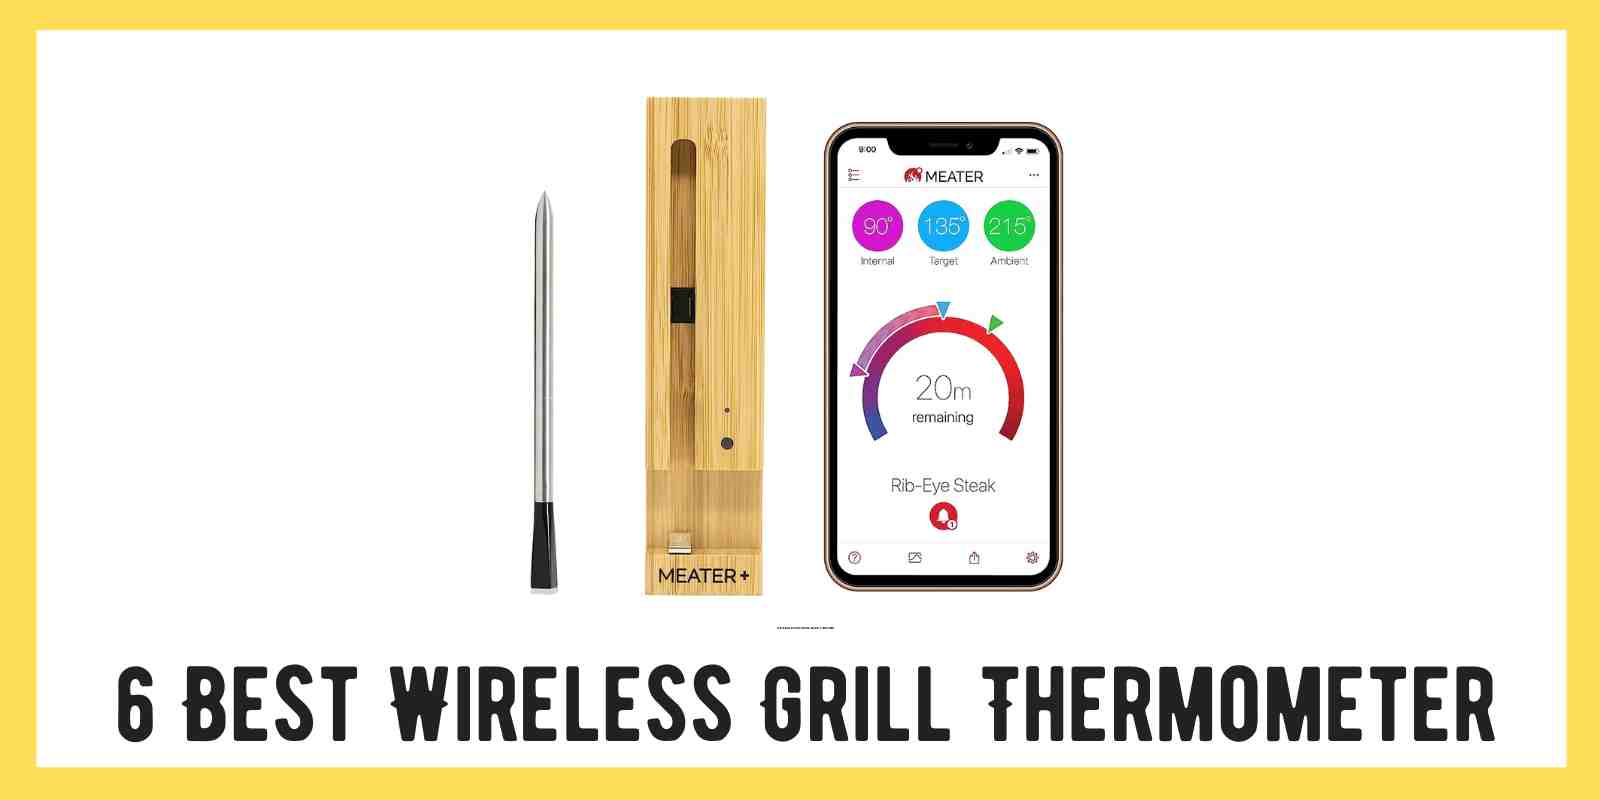 NutriChef Smart Bluetooth BBQ Grill Thermometer - Digital Display,  Stainless Dual Probes Safe to Leave in Outdoor Barbecue Meat Smoker -  Wireless